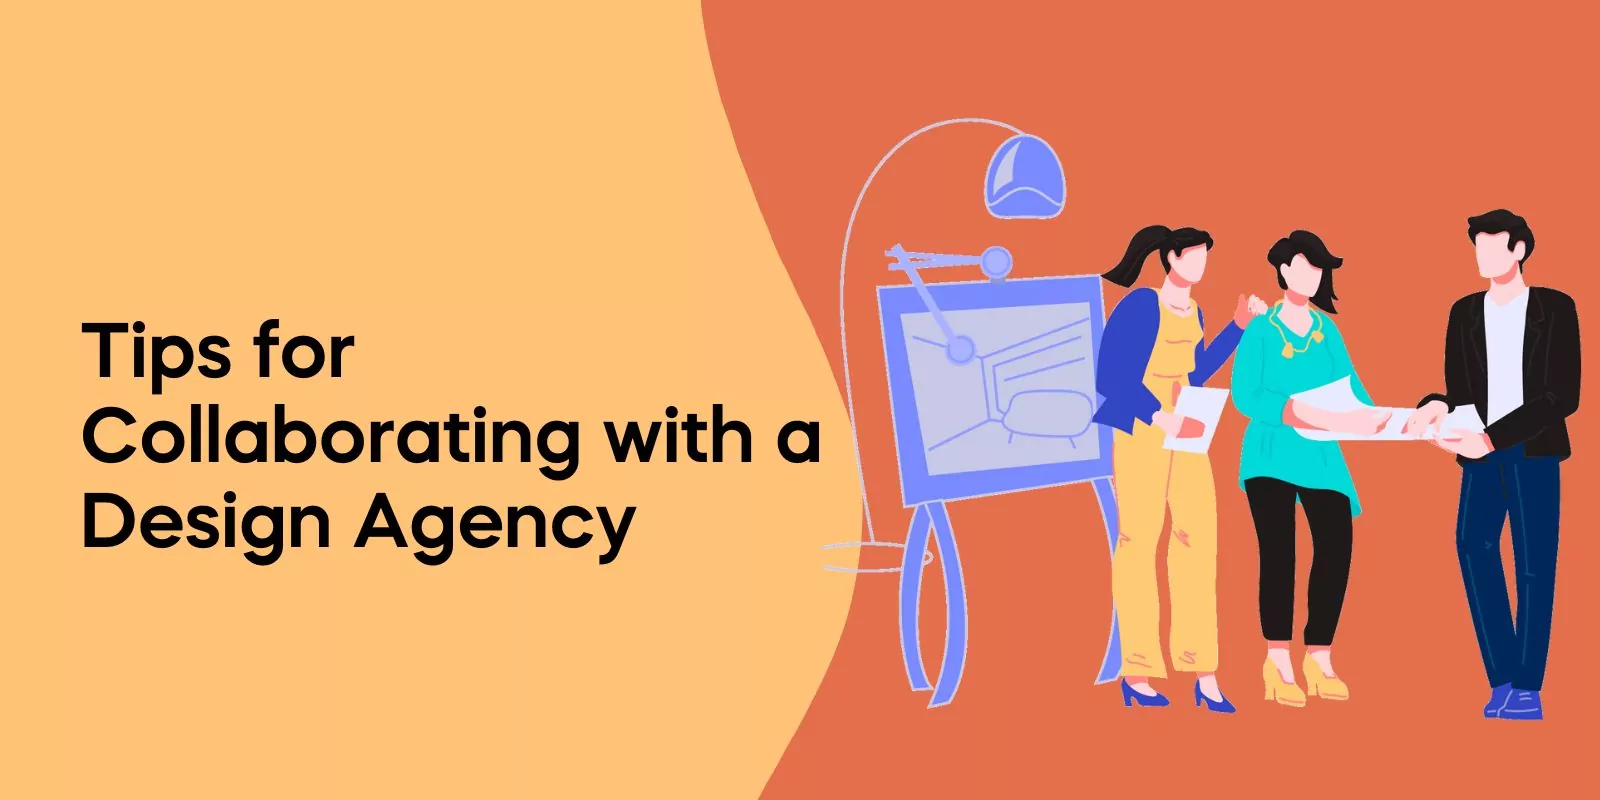 Tips for Collaborating with a Design Agency